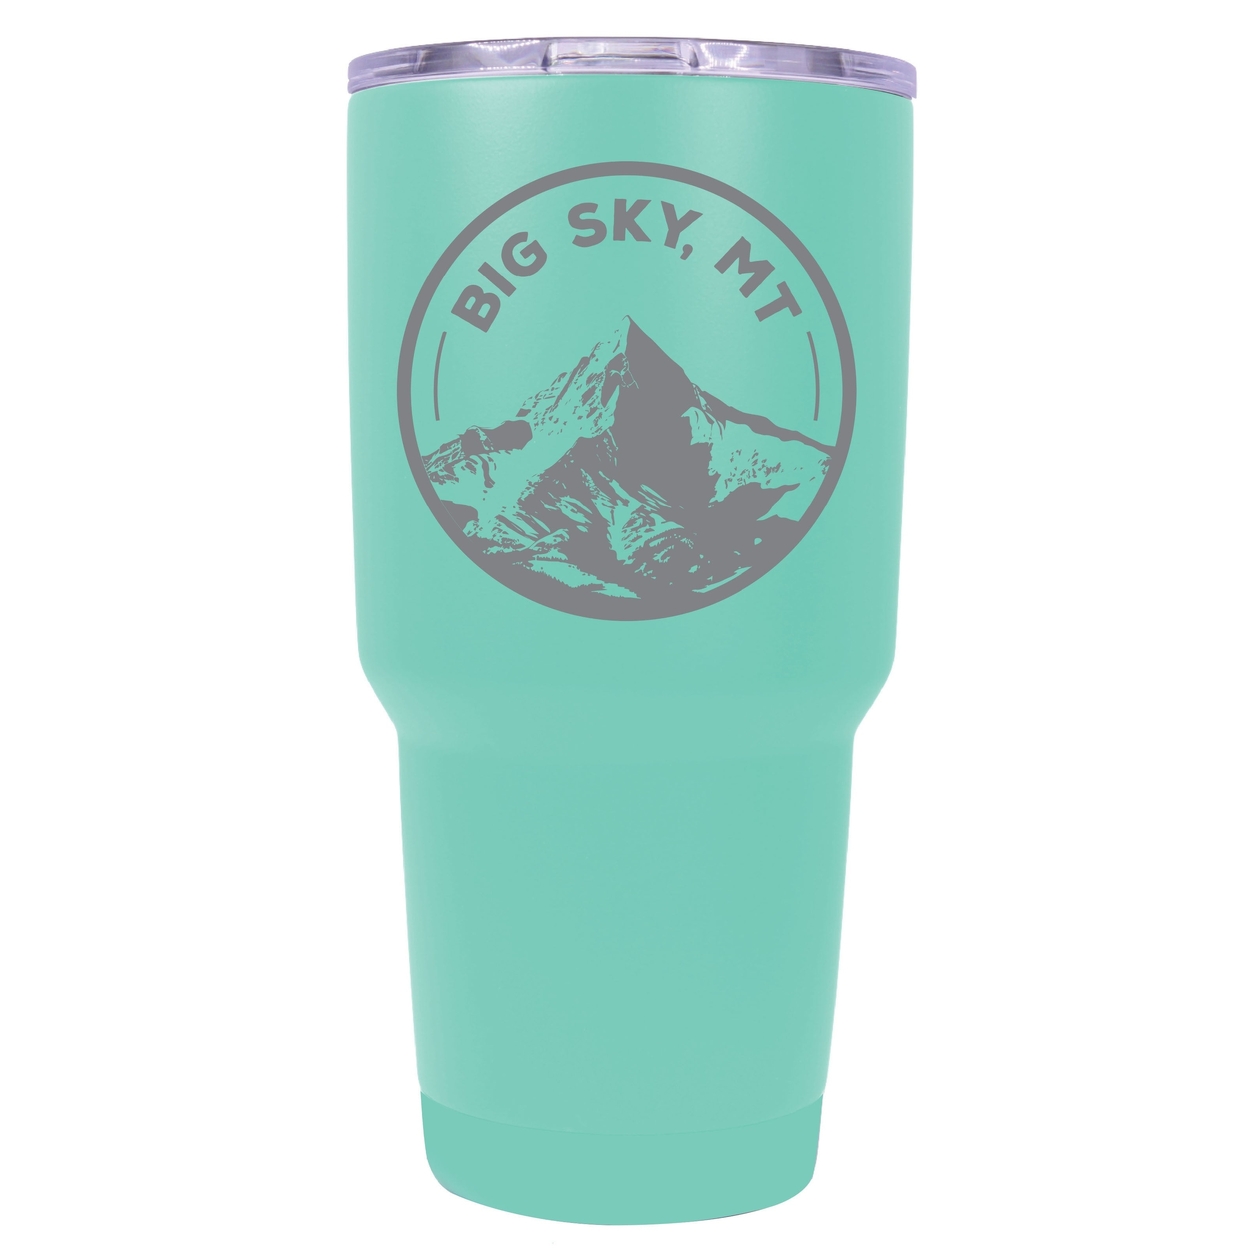 Big Sky Montana Souvenir 24 Oz Engraved Insulated Stainless Steel Tumbler - Seafoam,,4-Pack